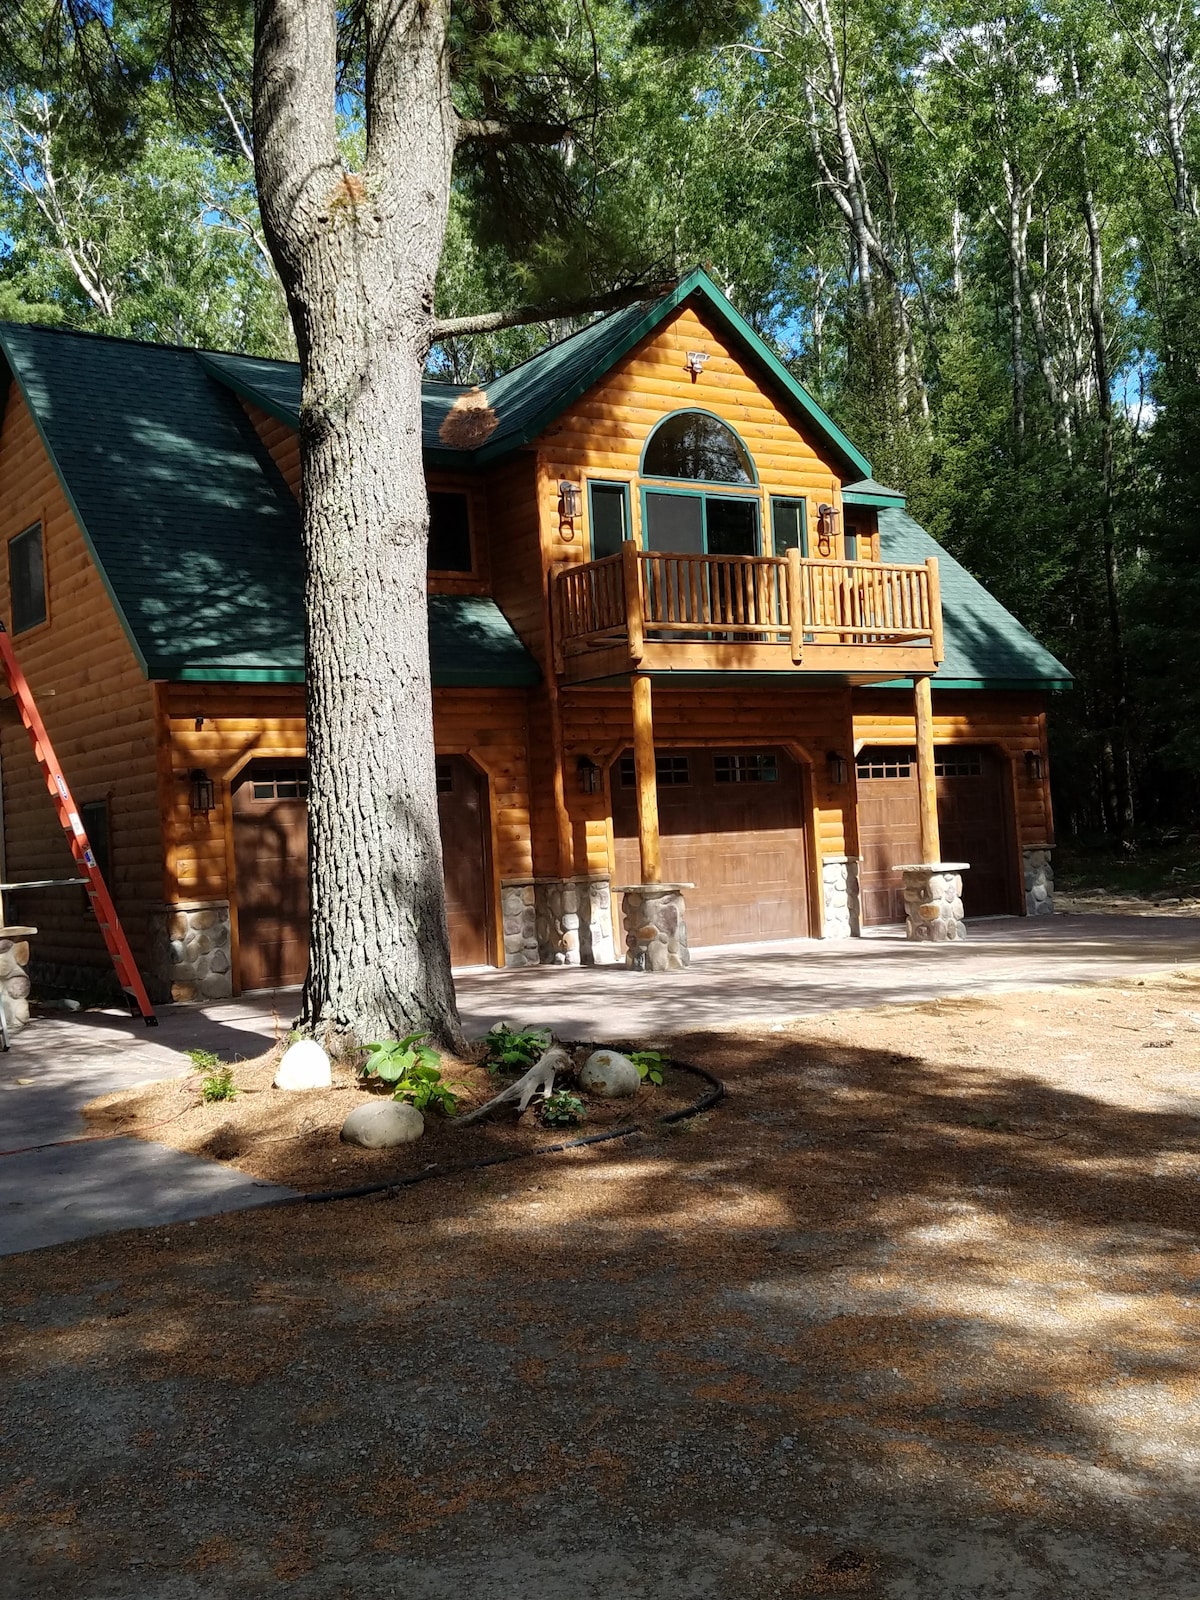 2 Bedroom cabin on the Au Sable River.